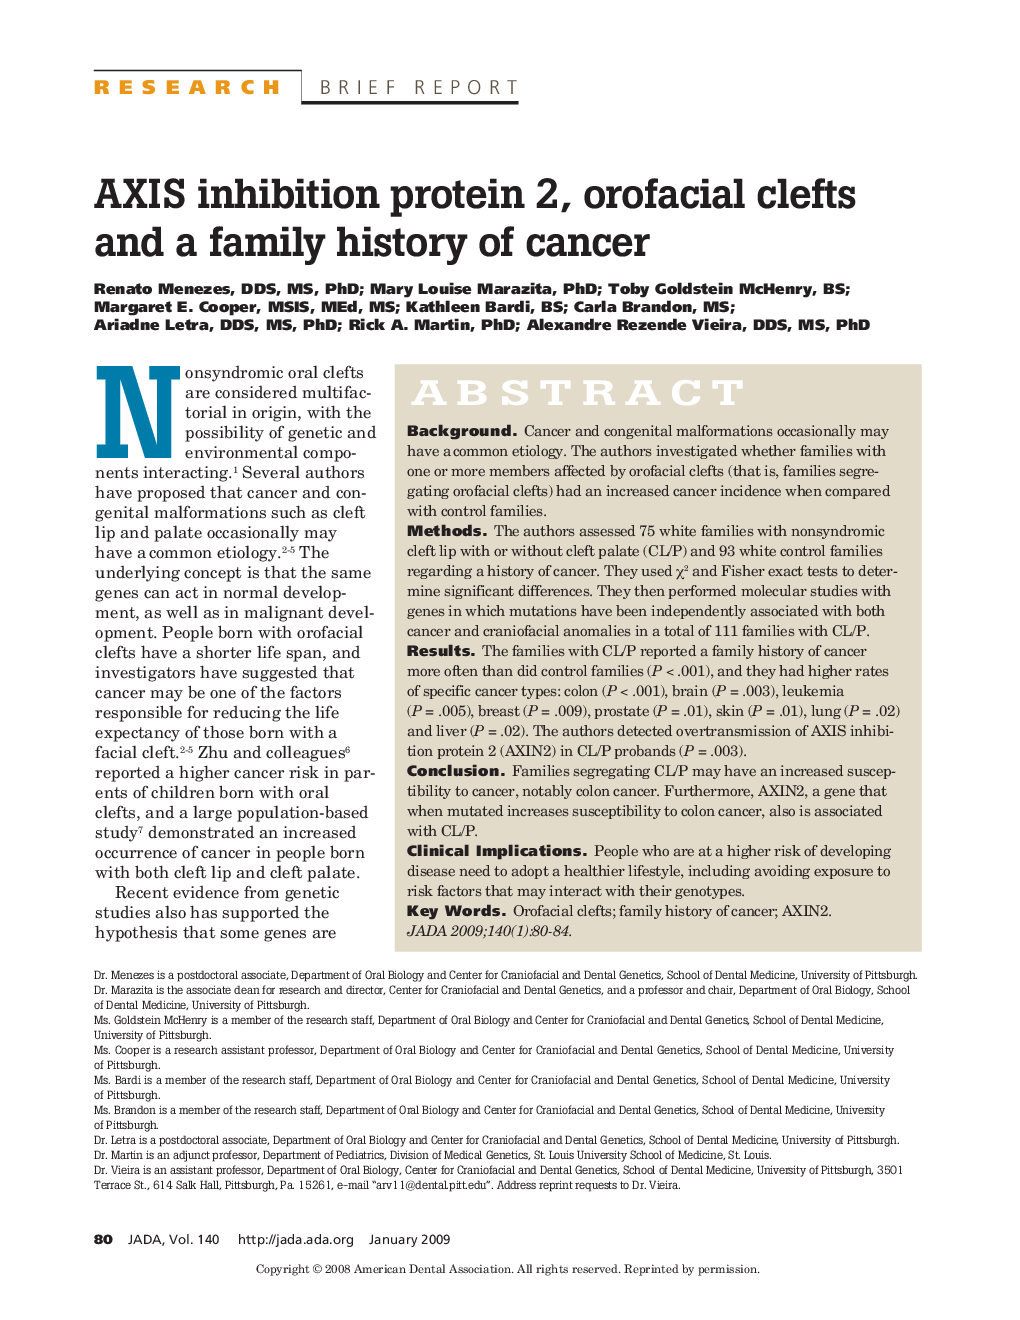 AXIS inhibition protein 2, orofacial clefts and a family history of cancer 